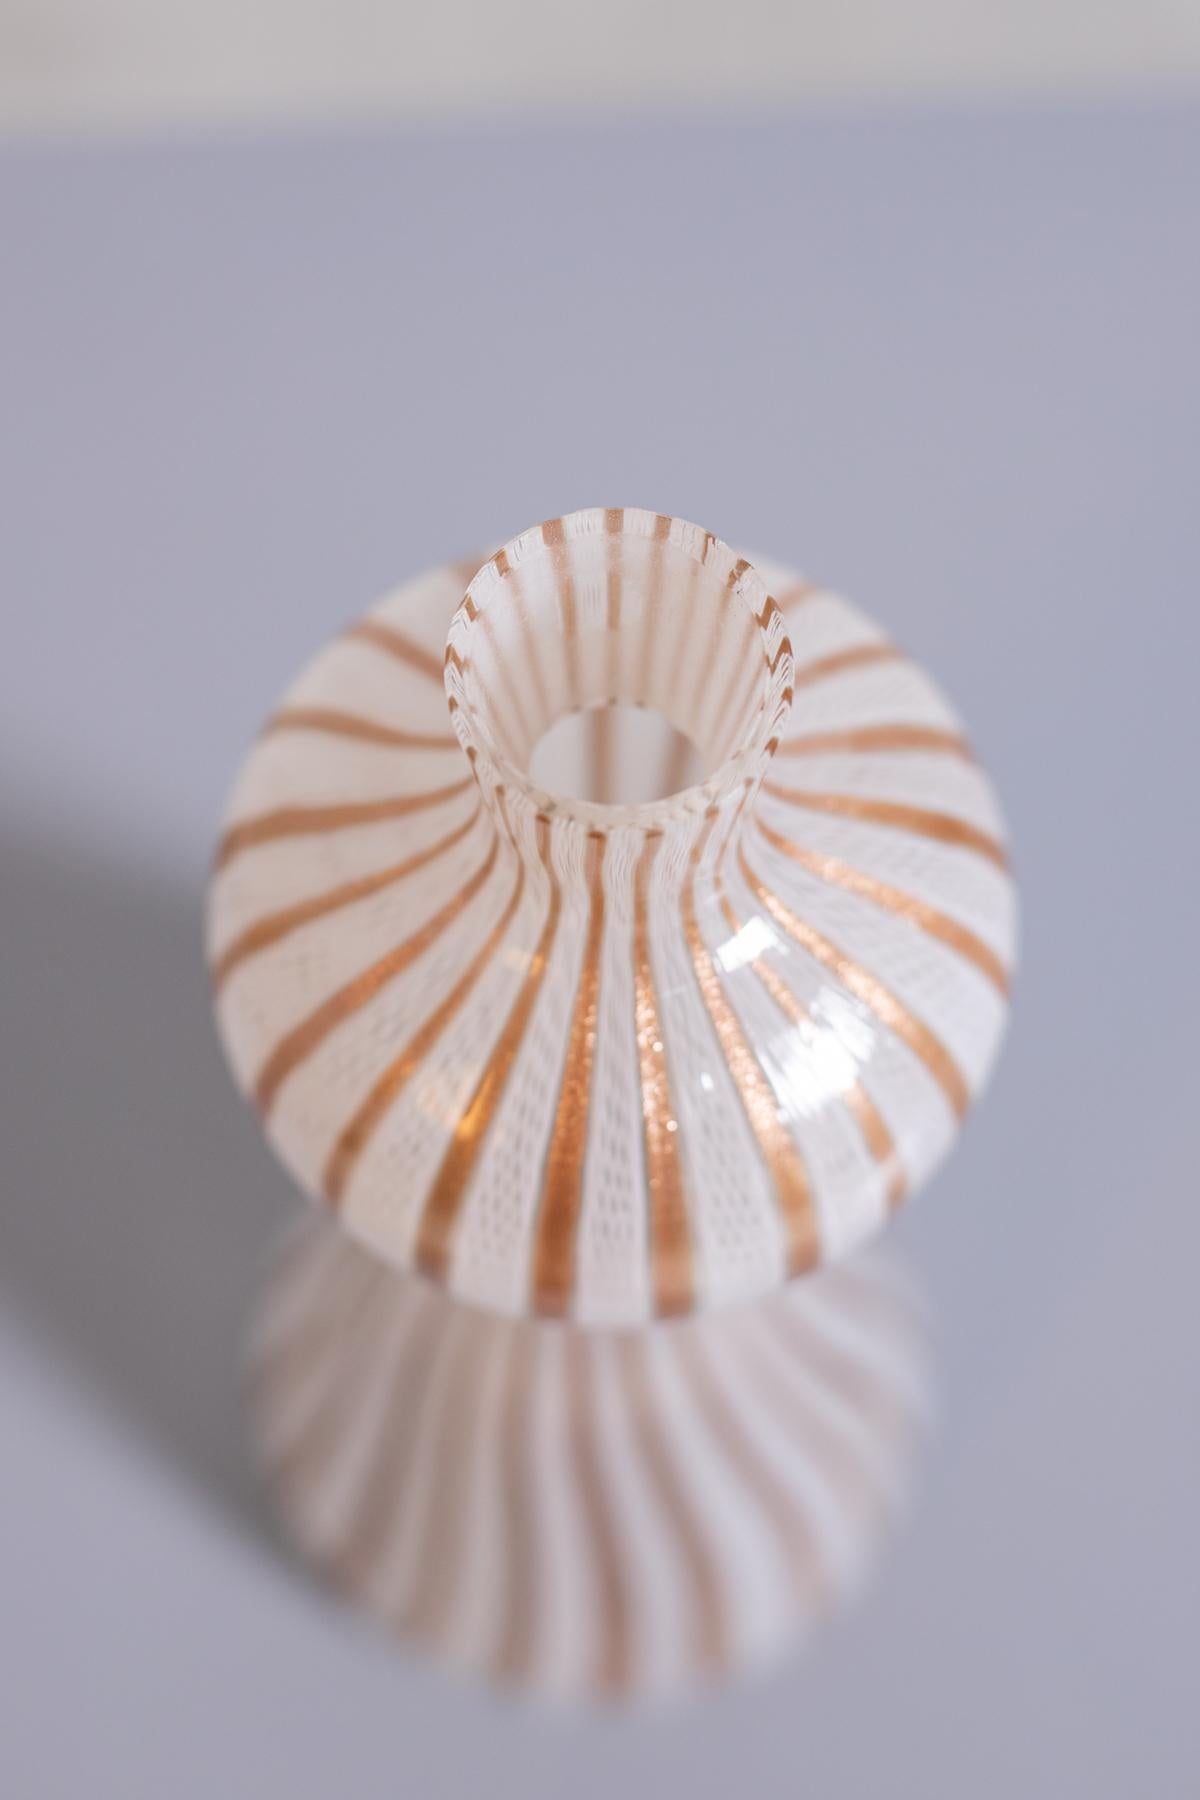 Mid-Century Modern Vase in Murano glass by Paolo Venini, 1950s